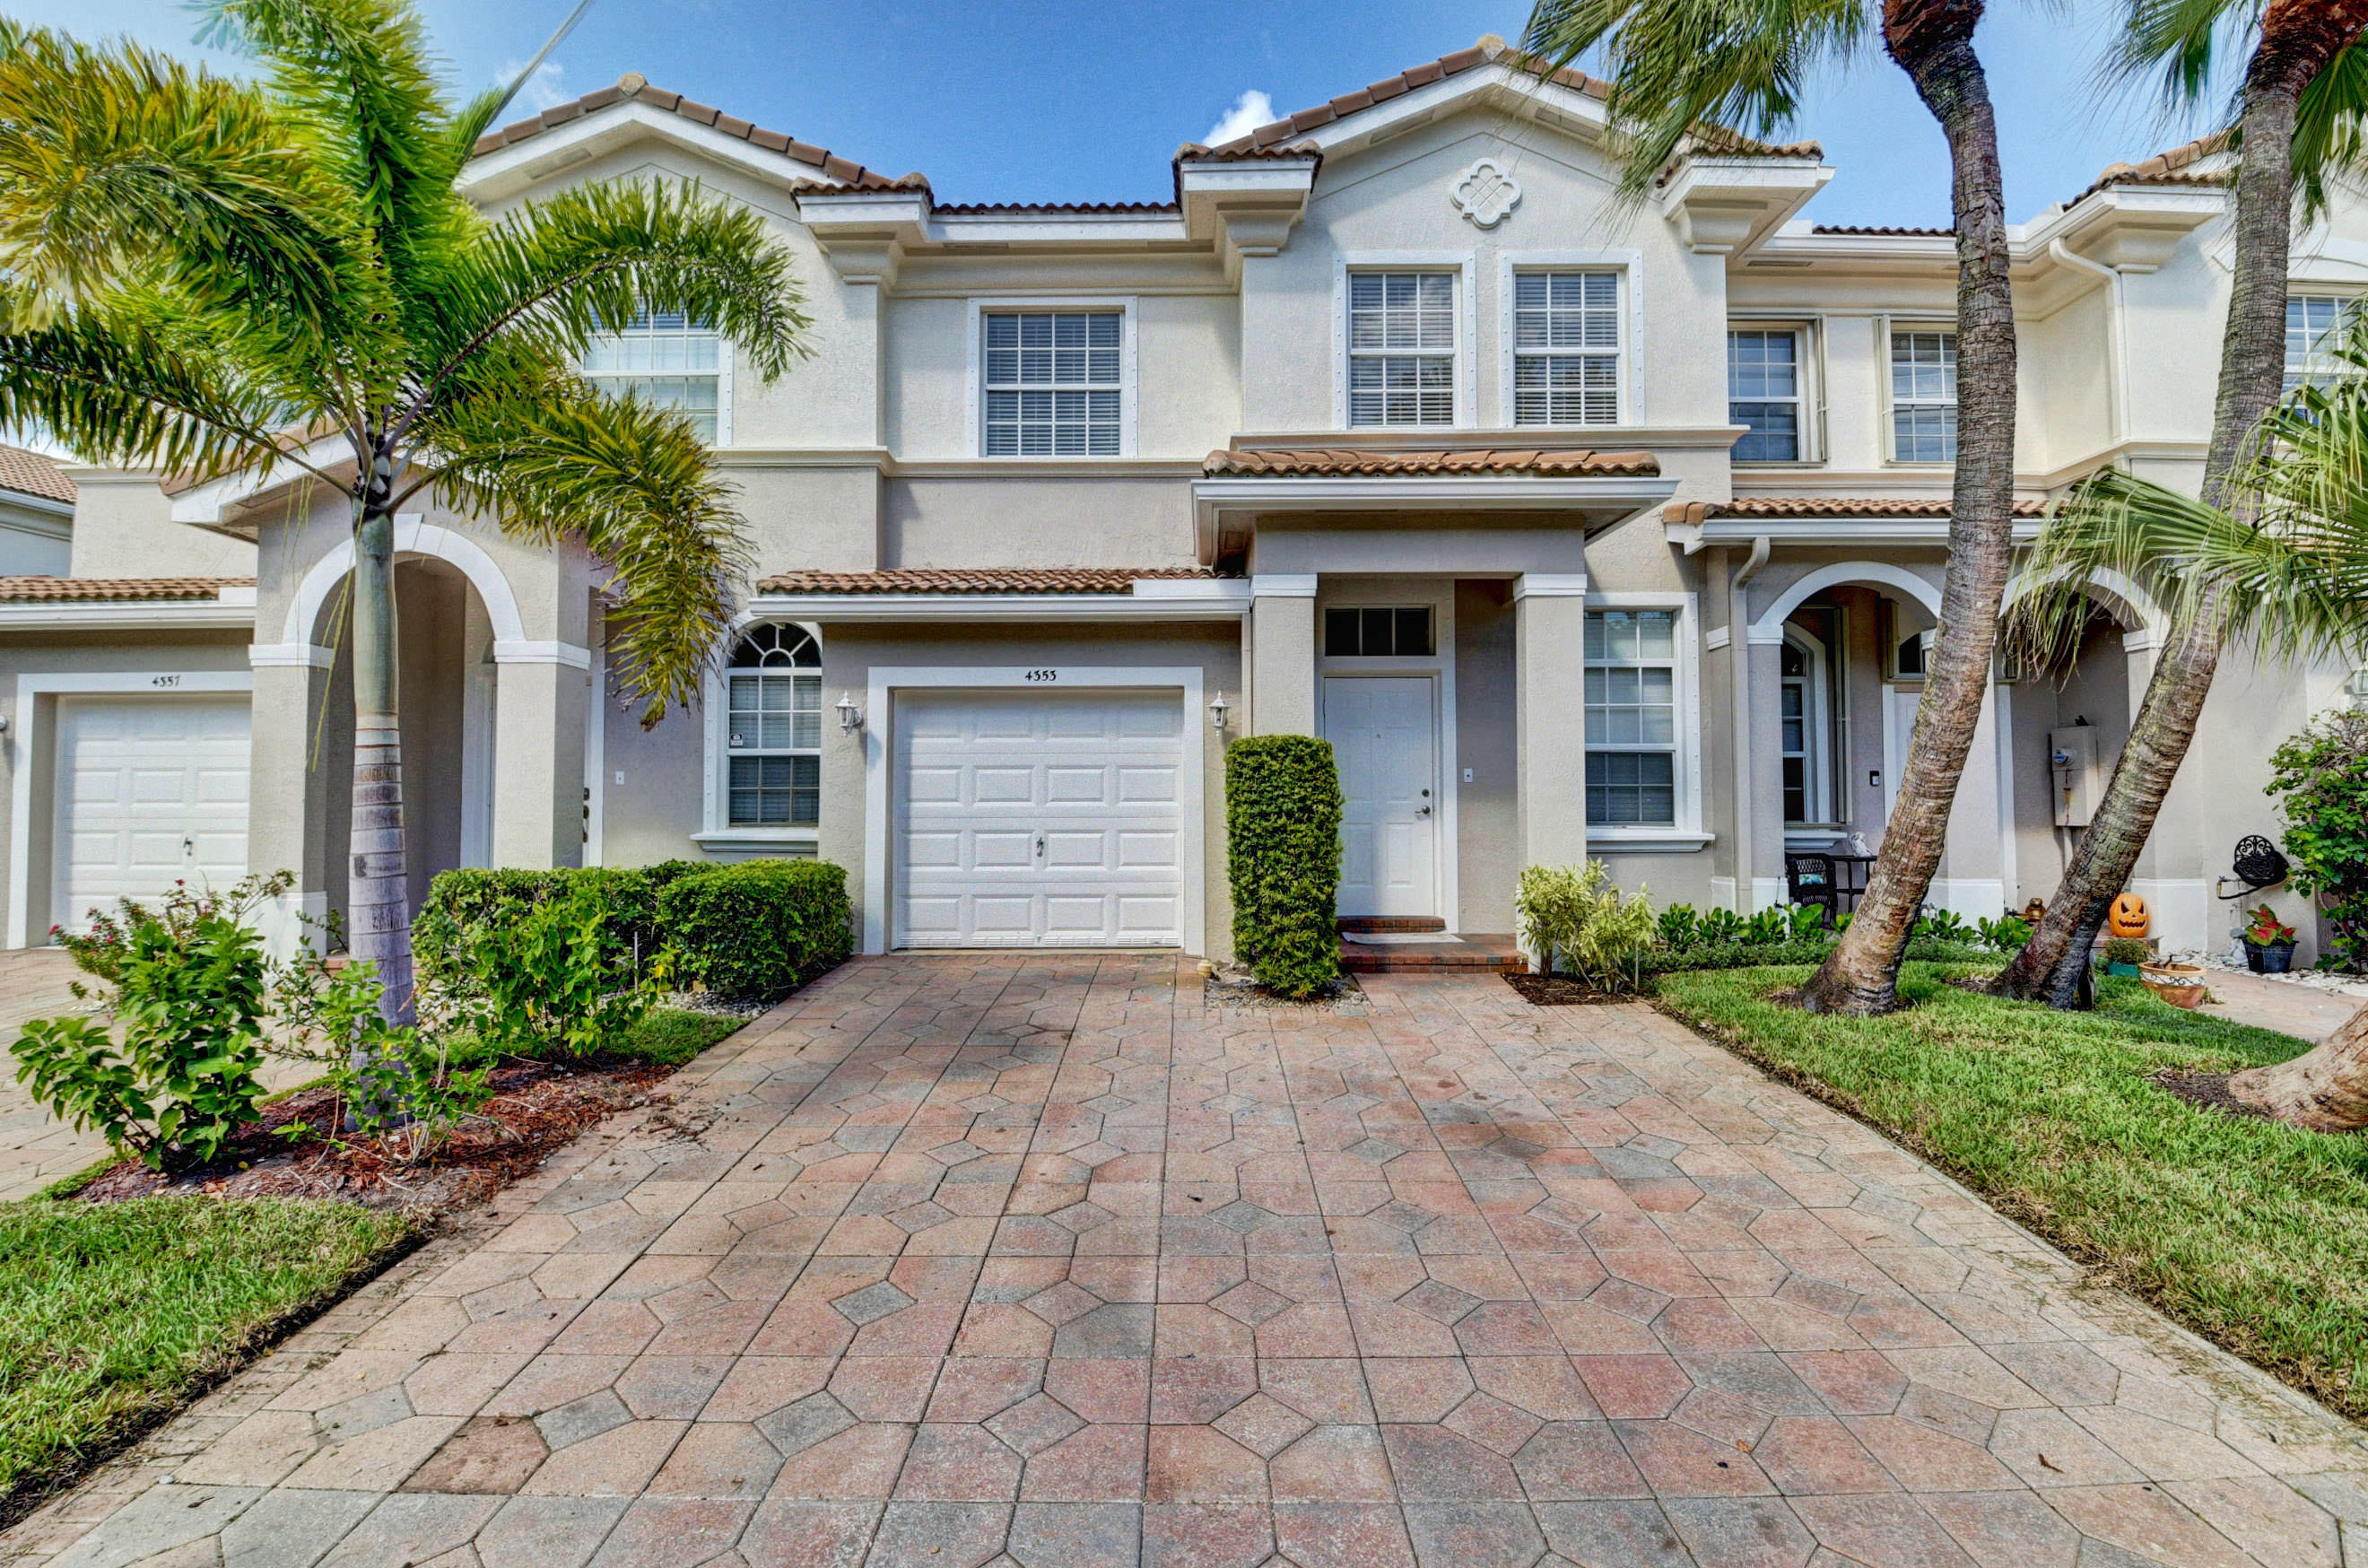 View Delray Beach, FL 33445 townhome